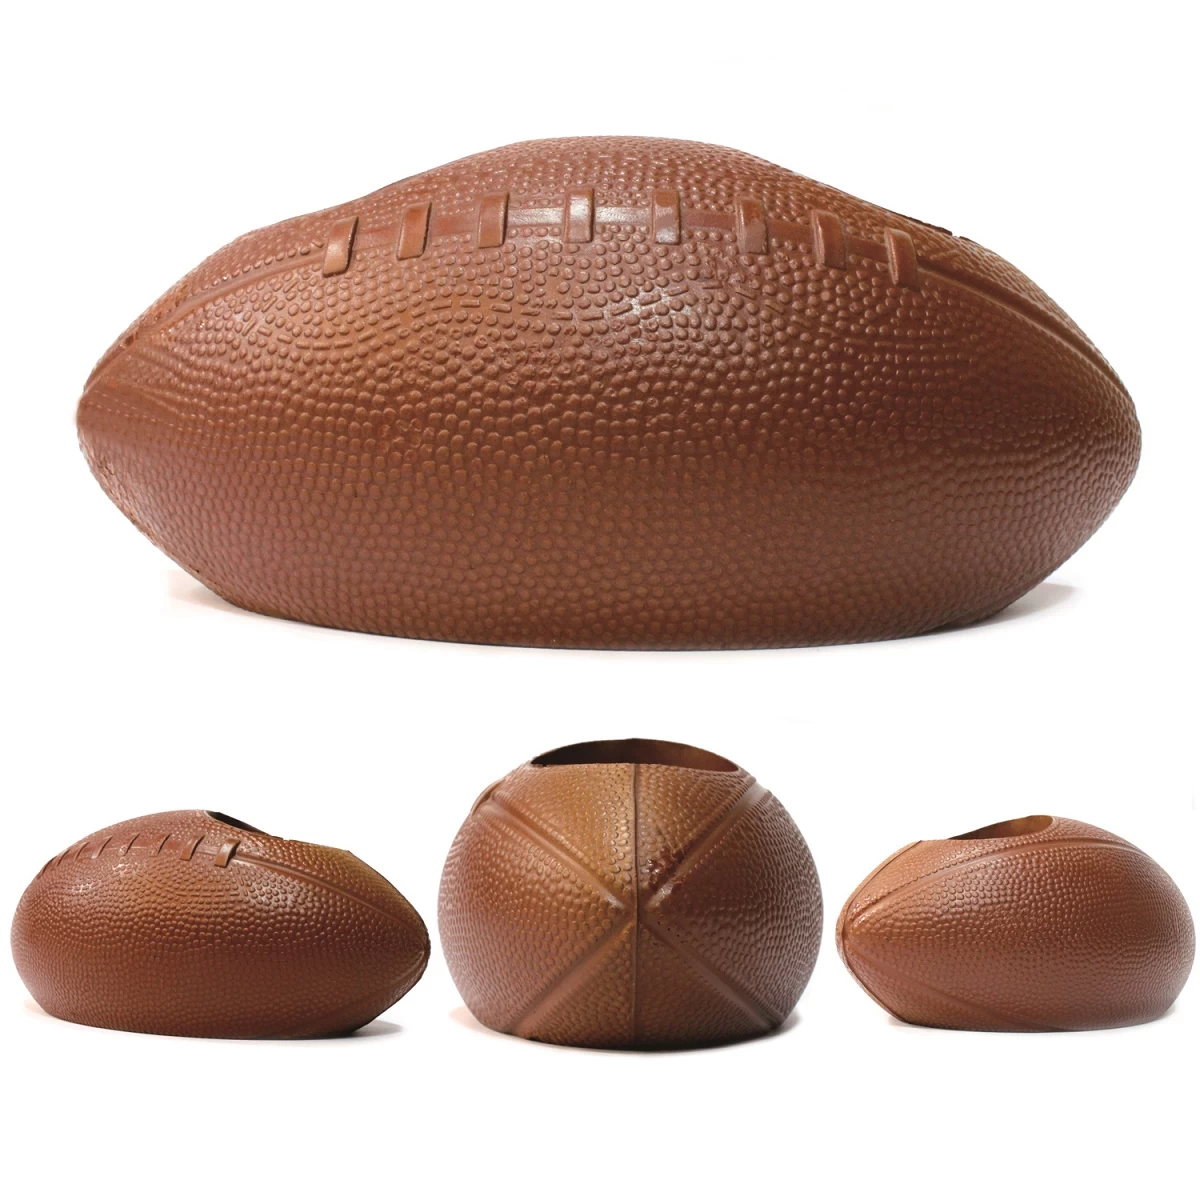 China whole sale foam rugby ball,customizable children adult play toys,PU Football article,Rugby Football fabricante